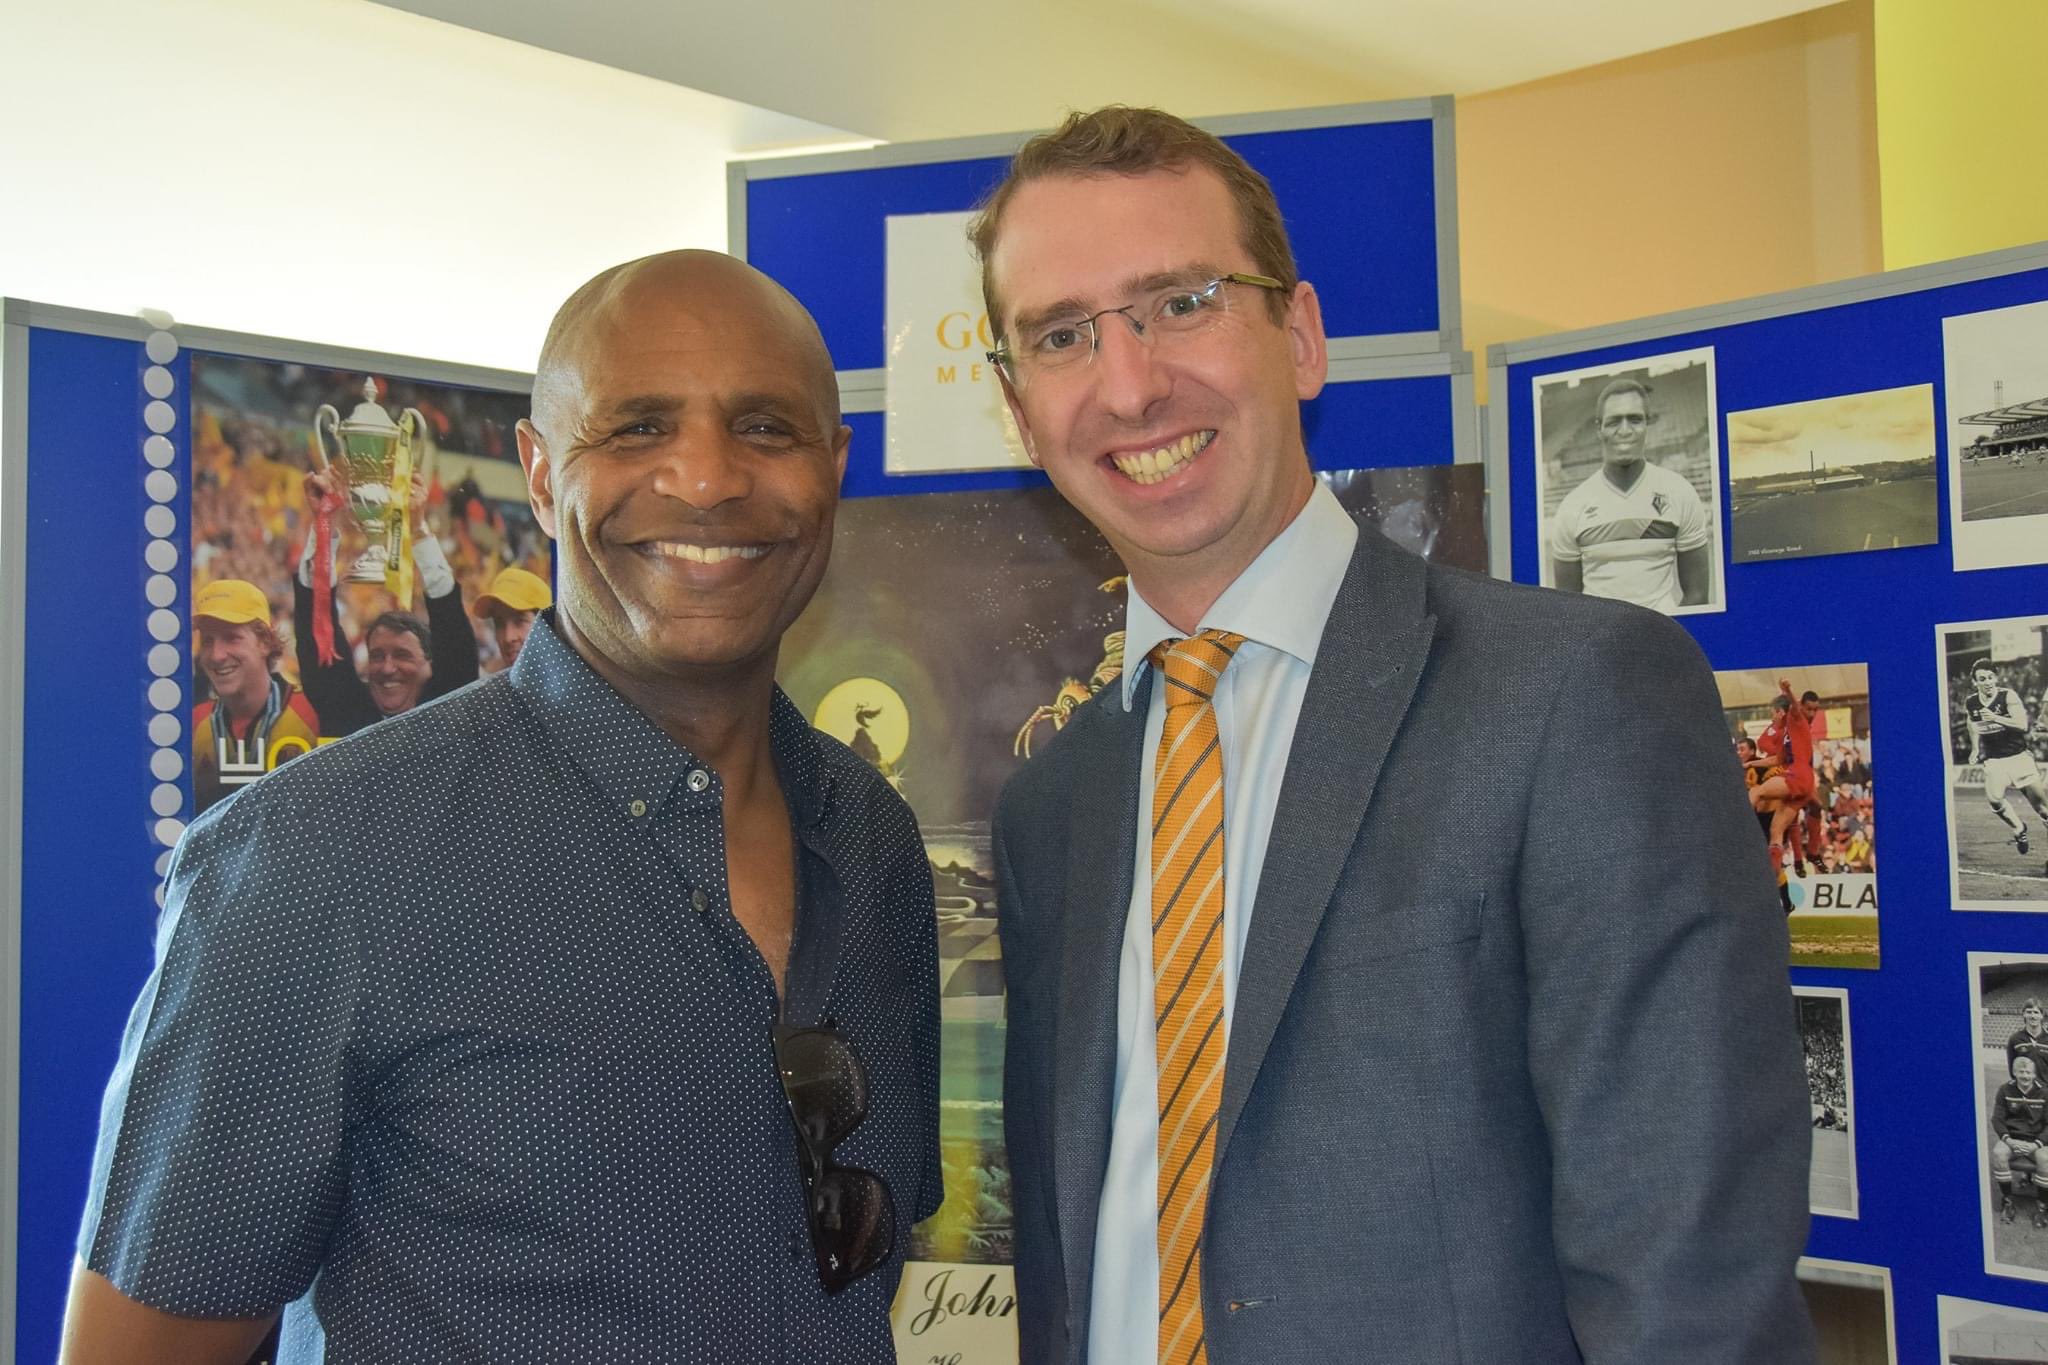 Luther blissett made honorary freeman of Watford